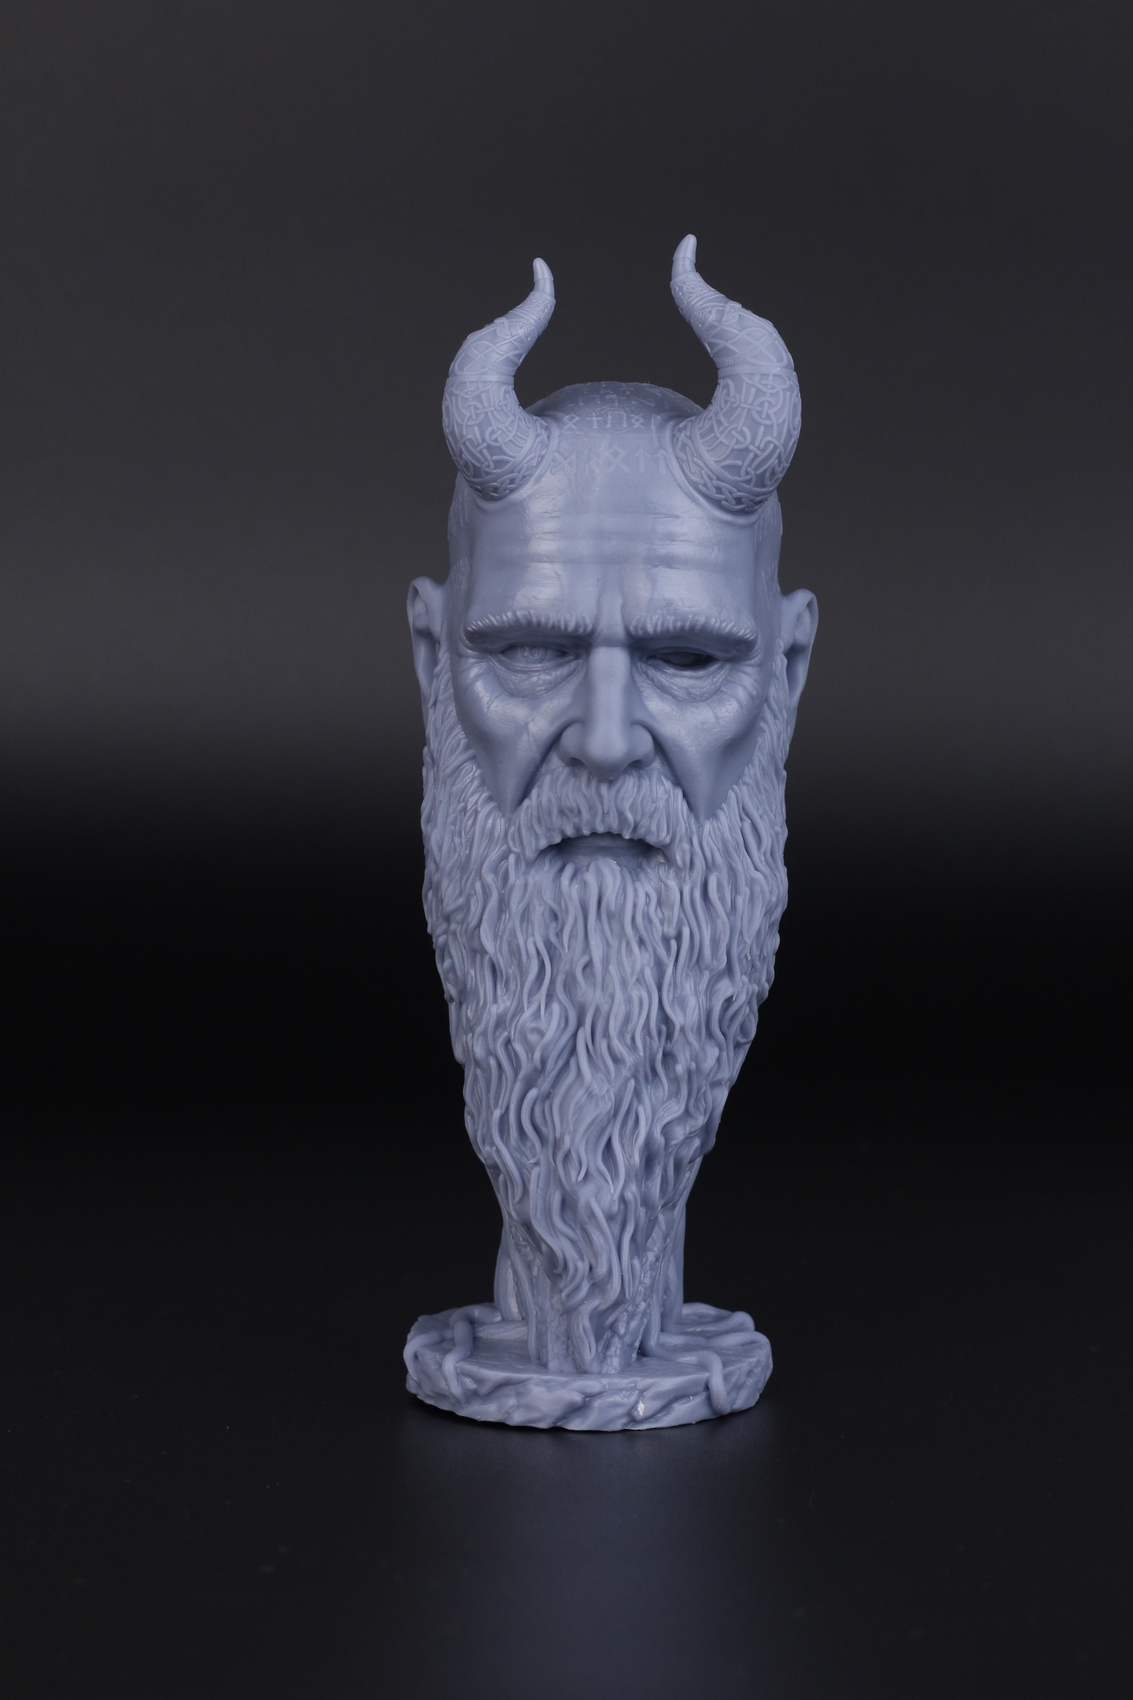 Mimir Bust from Fotis Mint printed on Anycubic Photon M31 | Anycubic Photon M3 Review: Bridging the gap